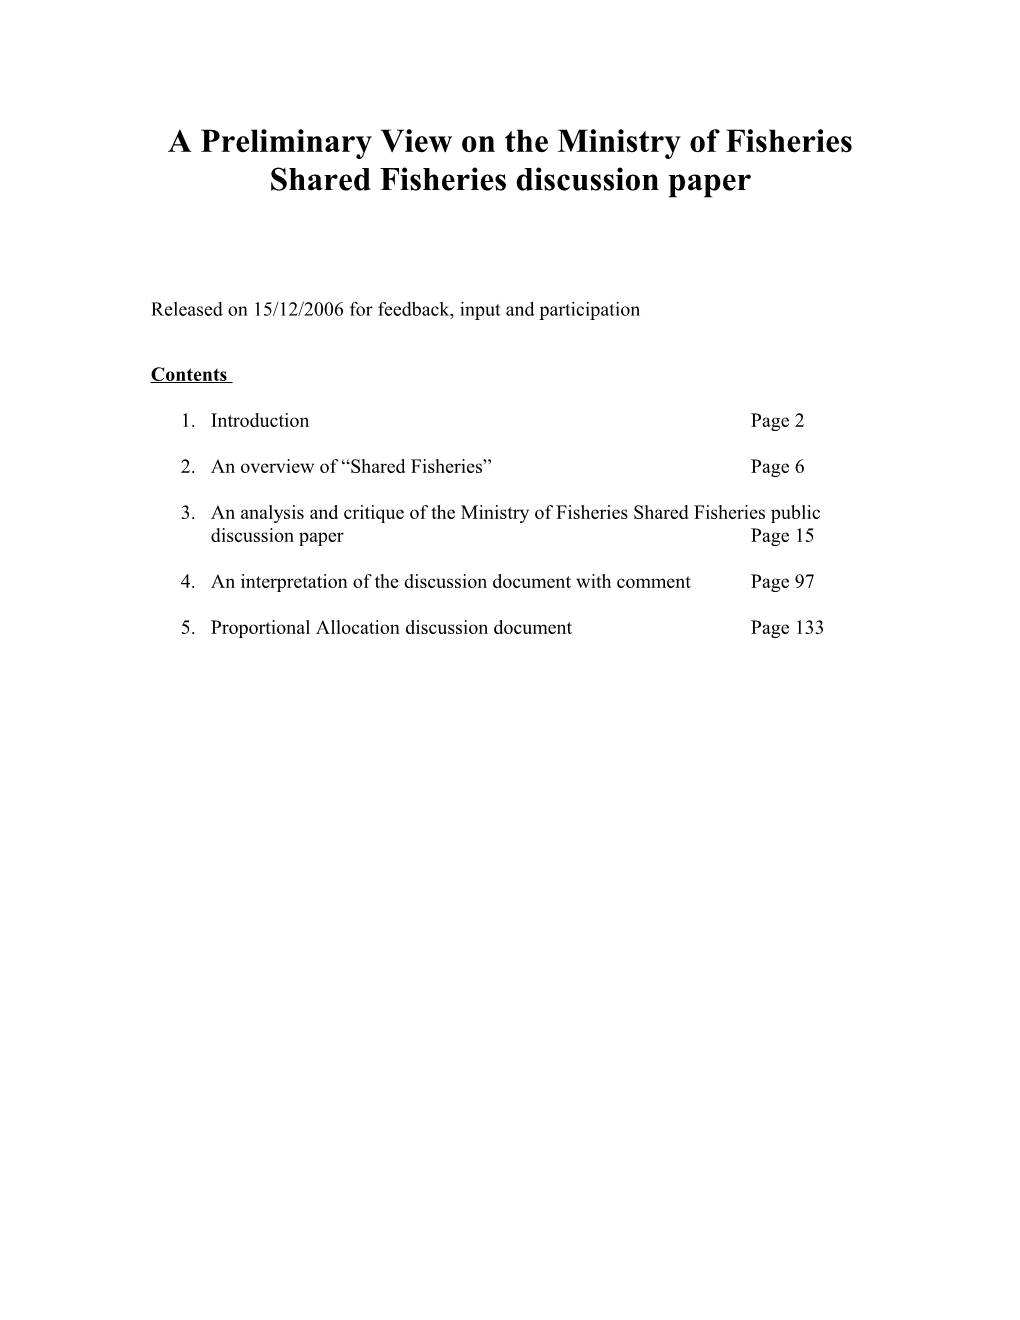 A Preliminary View on the Public Discussion Paper Presenting Proposals for Managing New s1